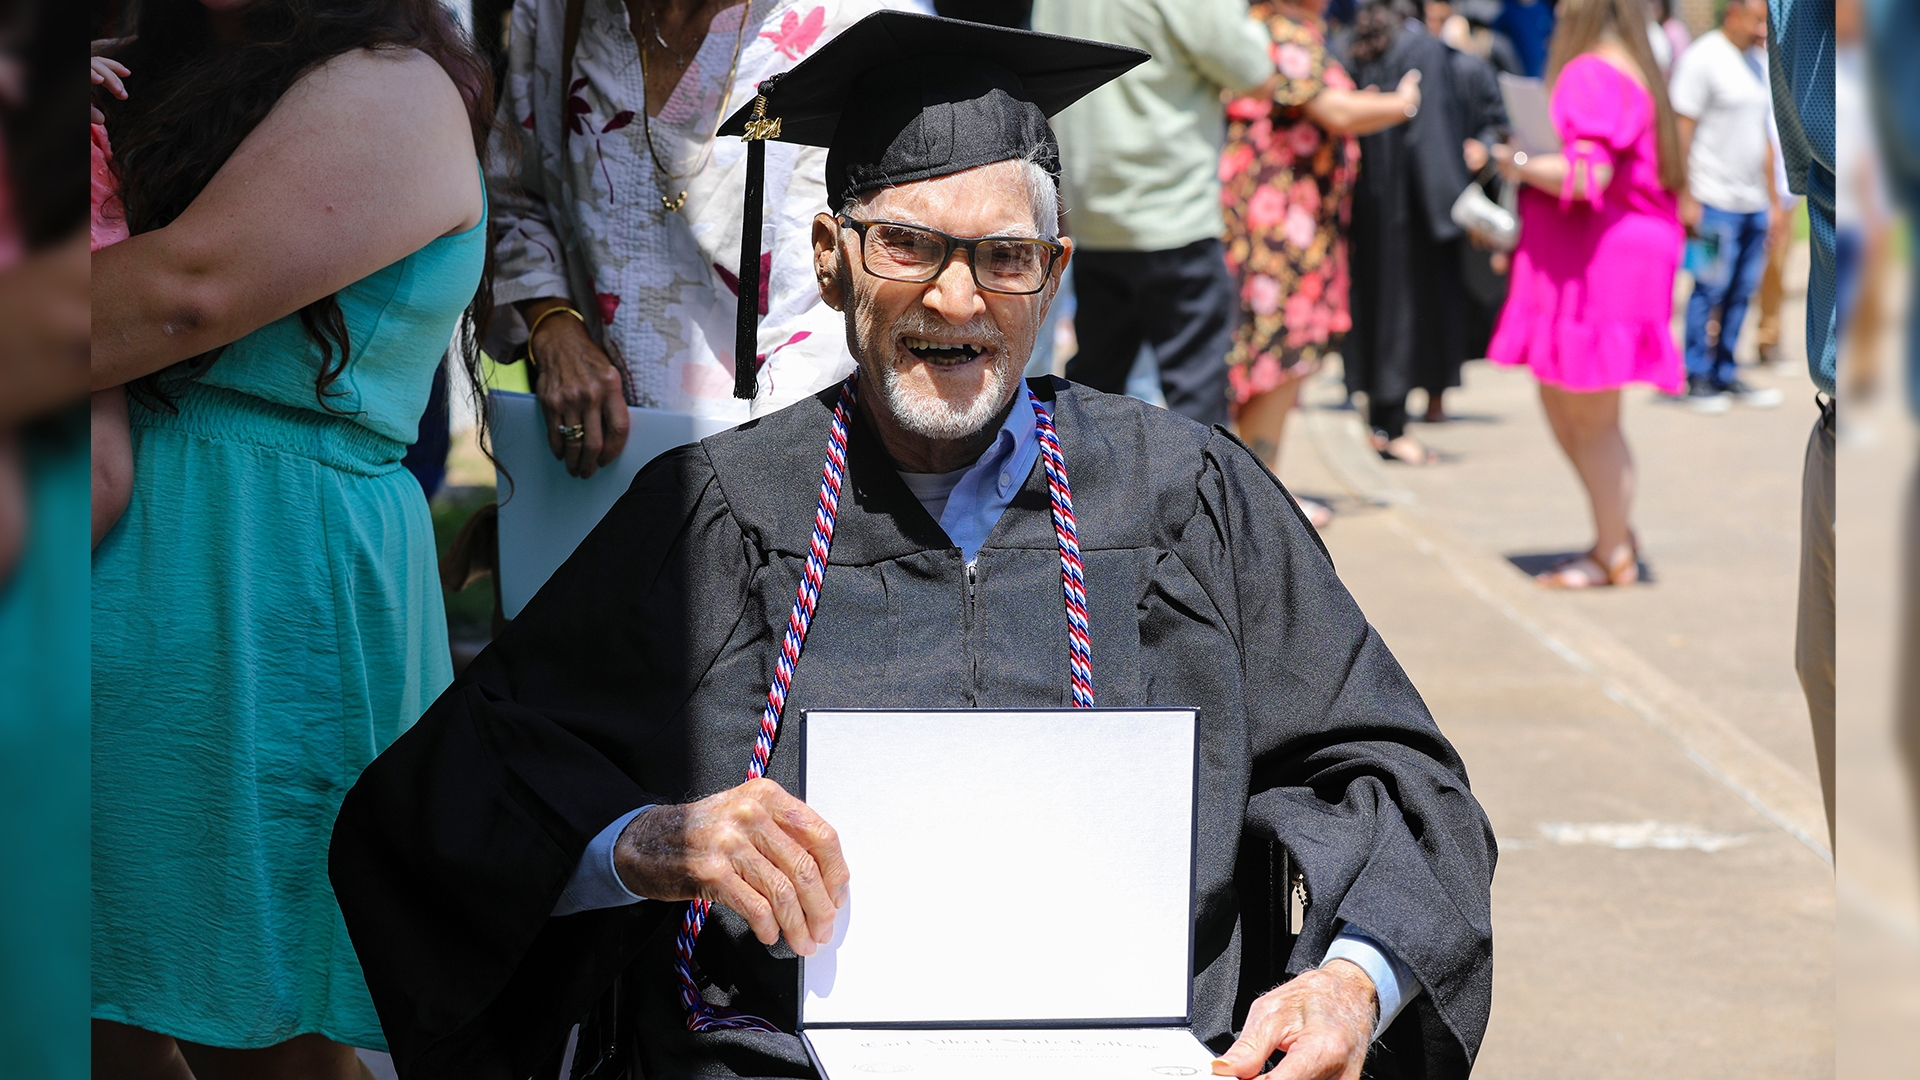 A 96-YEAR-OLD GRADUATE DONNED TASSELS AND ROBES FOR A COLLEGE GRADUATION, AND IT WAS MORE THAN A CELEBRATION TO HIM- IT WAS A SIMPLE WAY TO PROVE HE'S RIGHT...